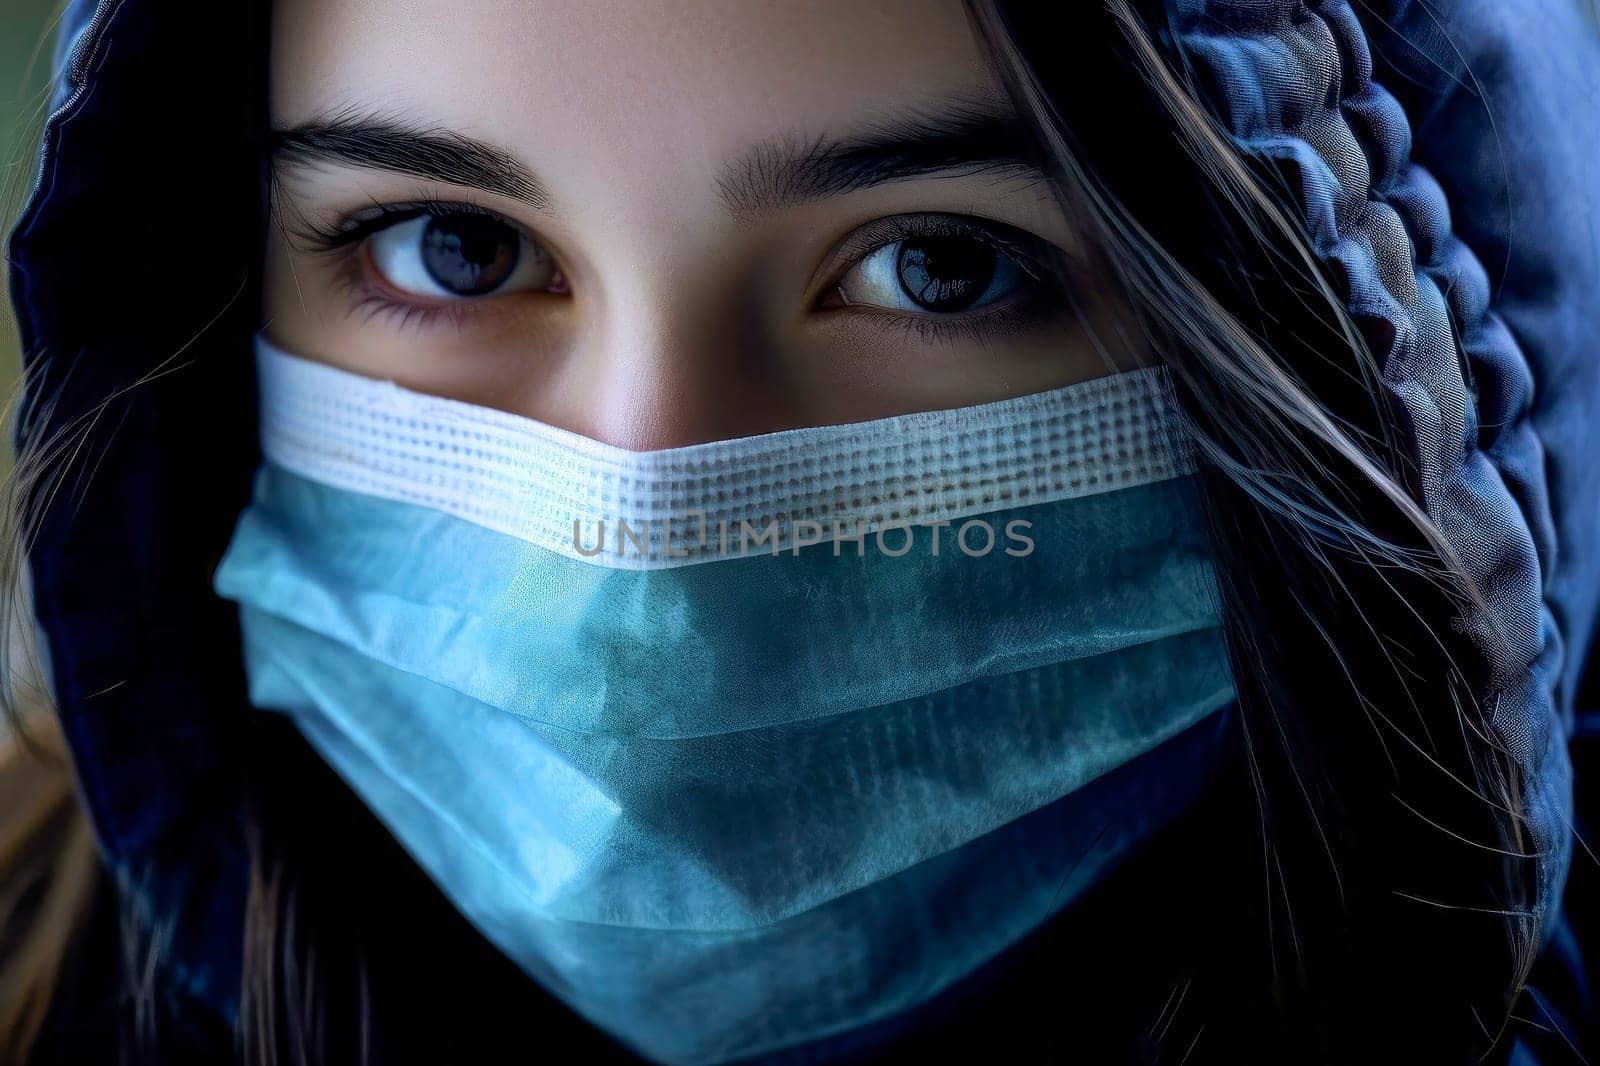 Urban style girl wearing hoodie and medical mask during pandemic, portraying resilience.